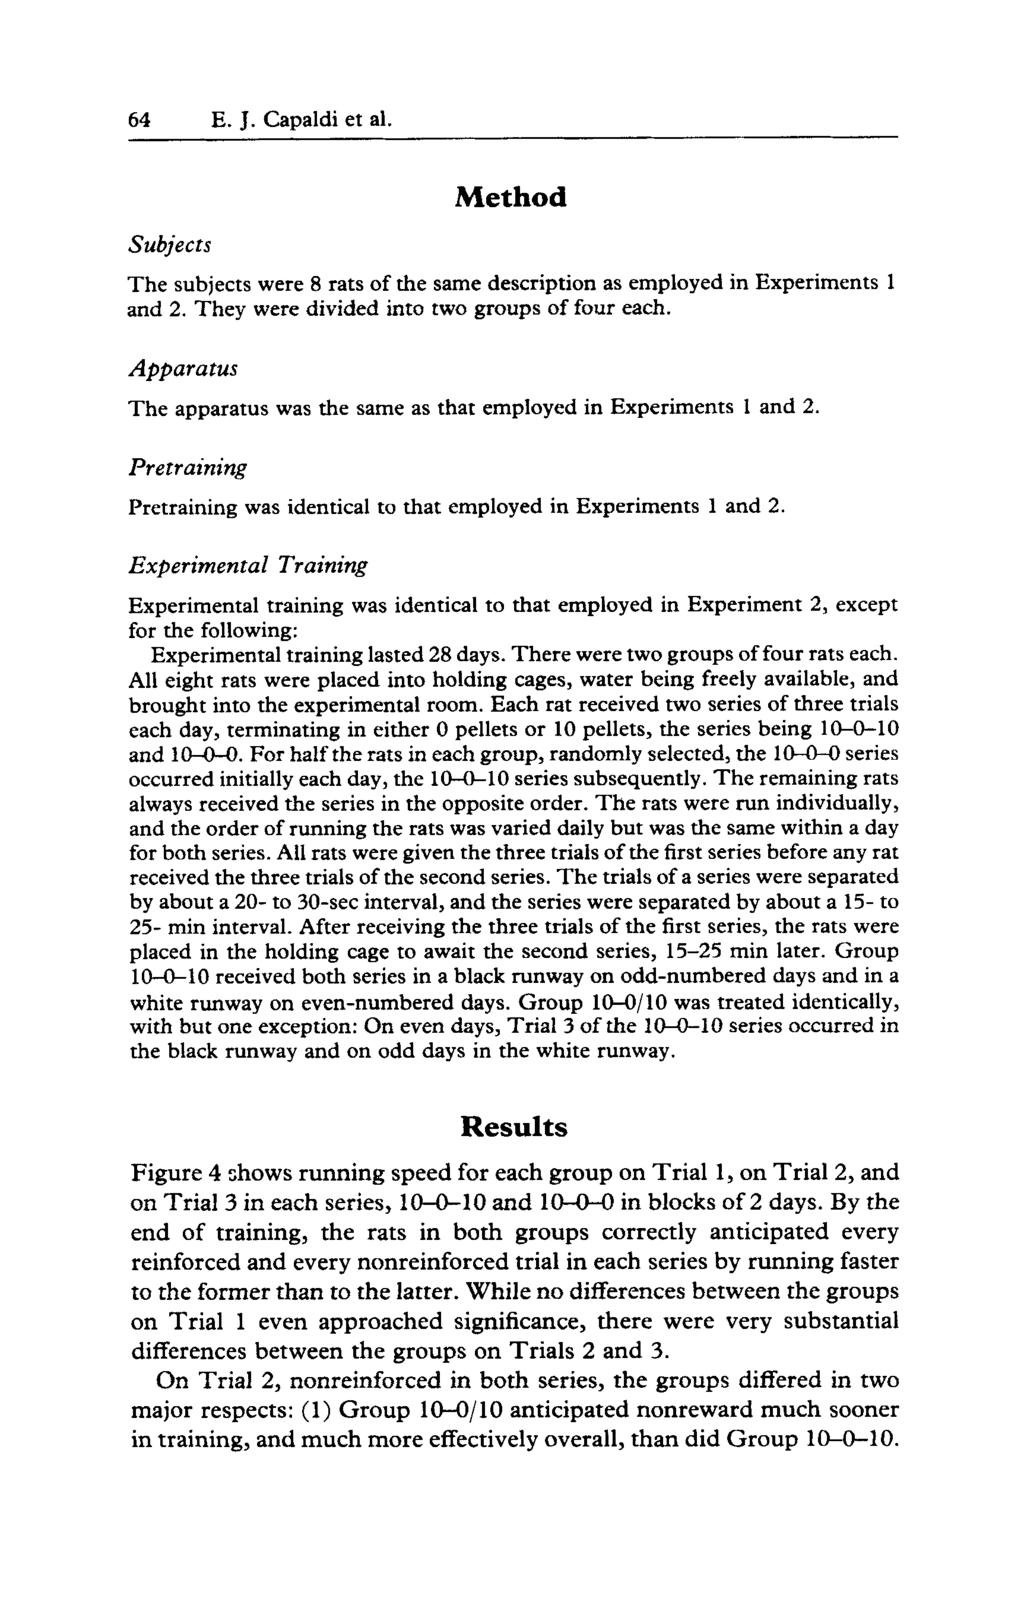 64 E. J. Capaldi et al. Subjects Method The subjects were 8 rats of the same description as employed in Experiments 1 and 2. They were divided into two groups of four each.